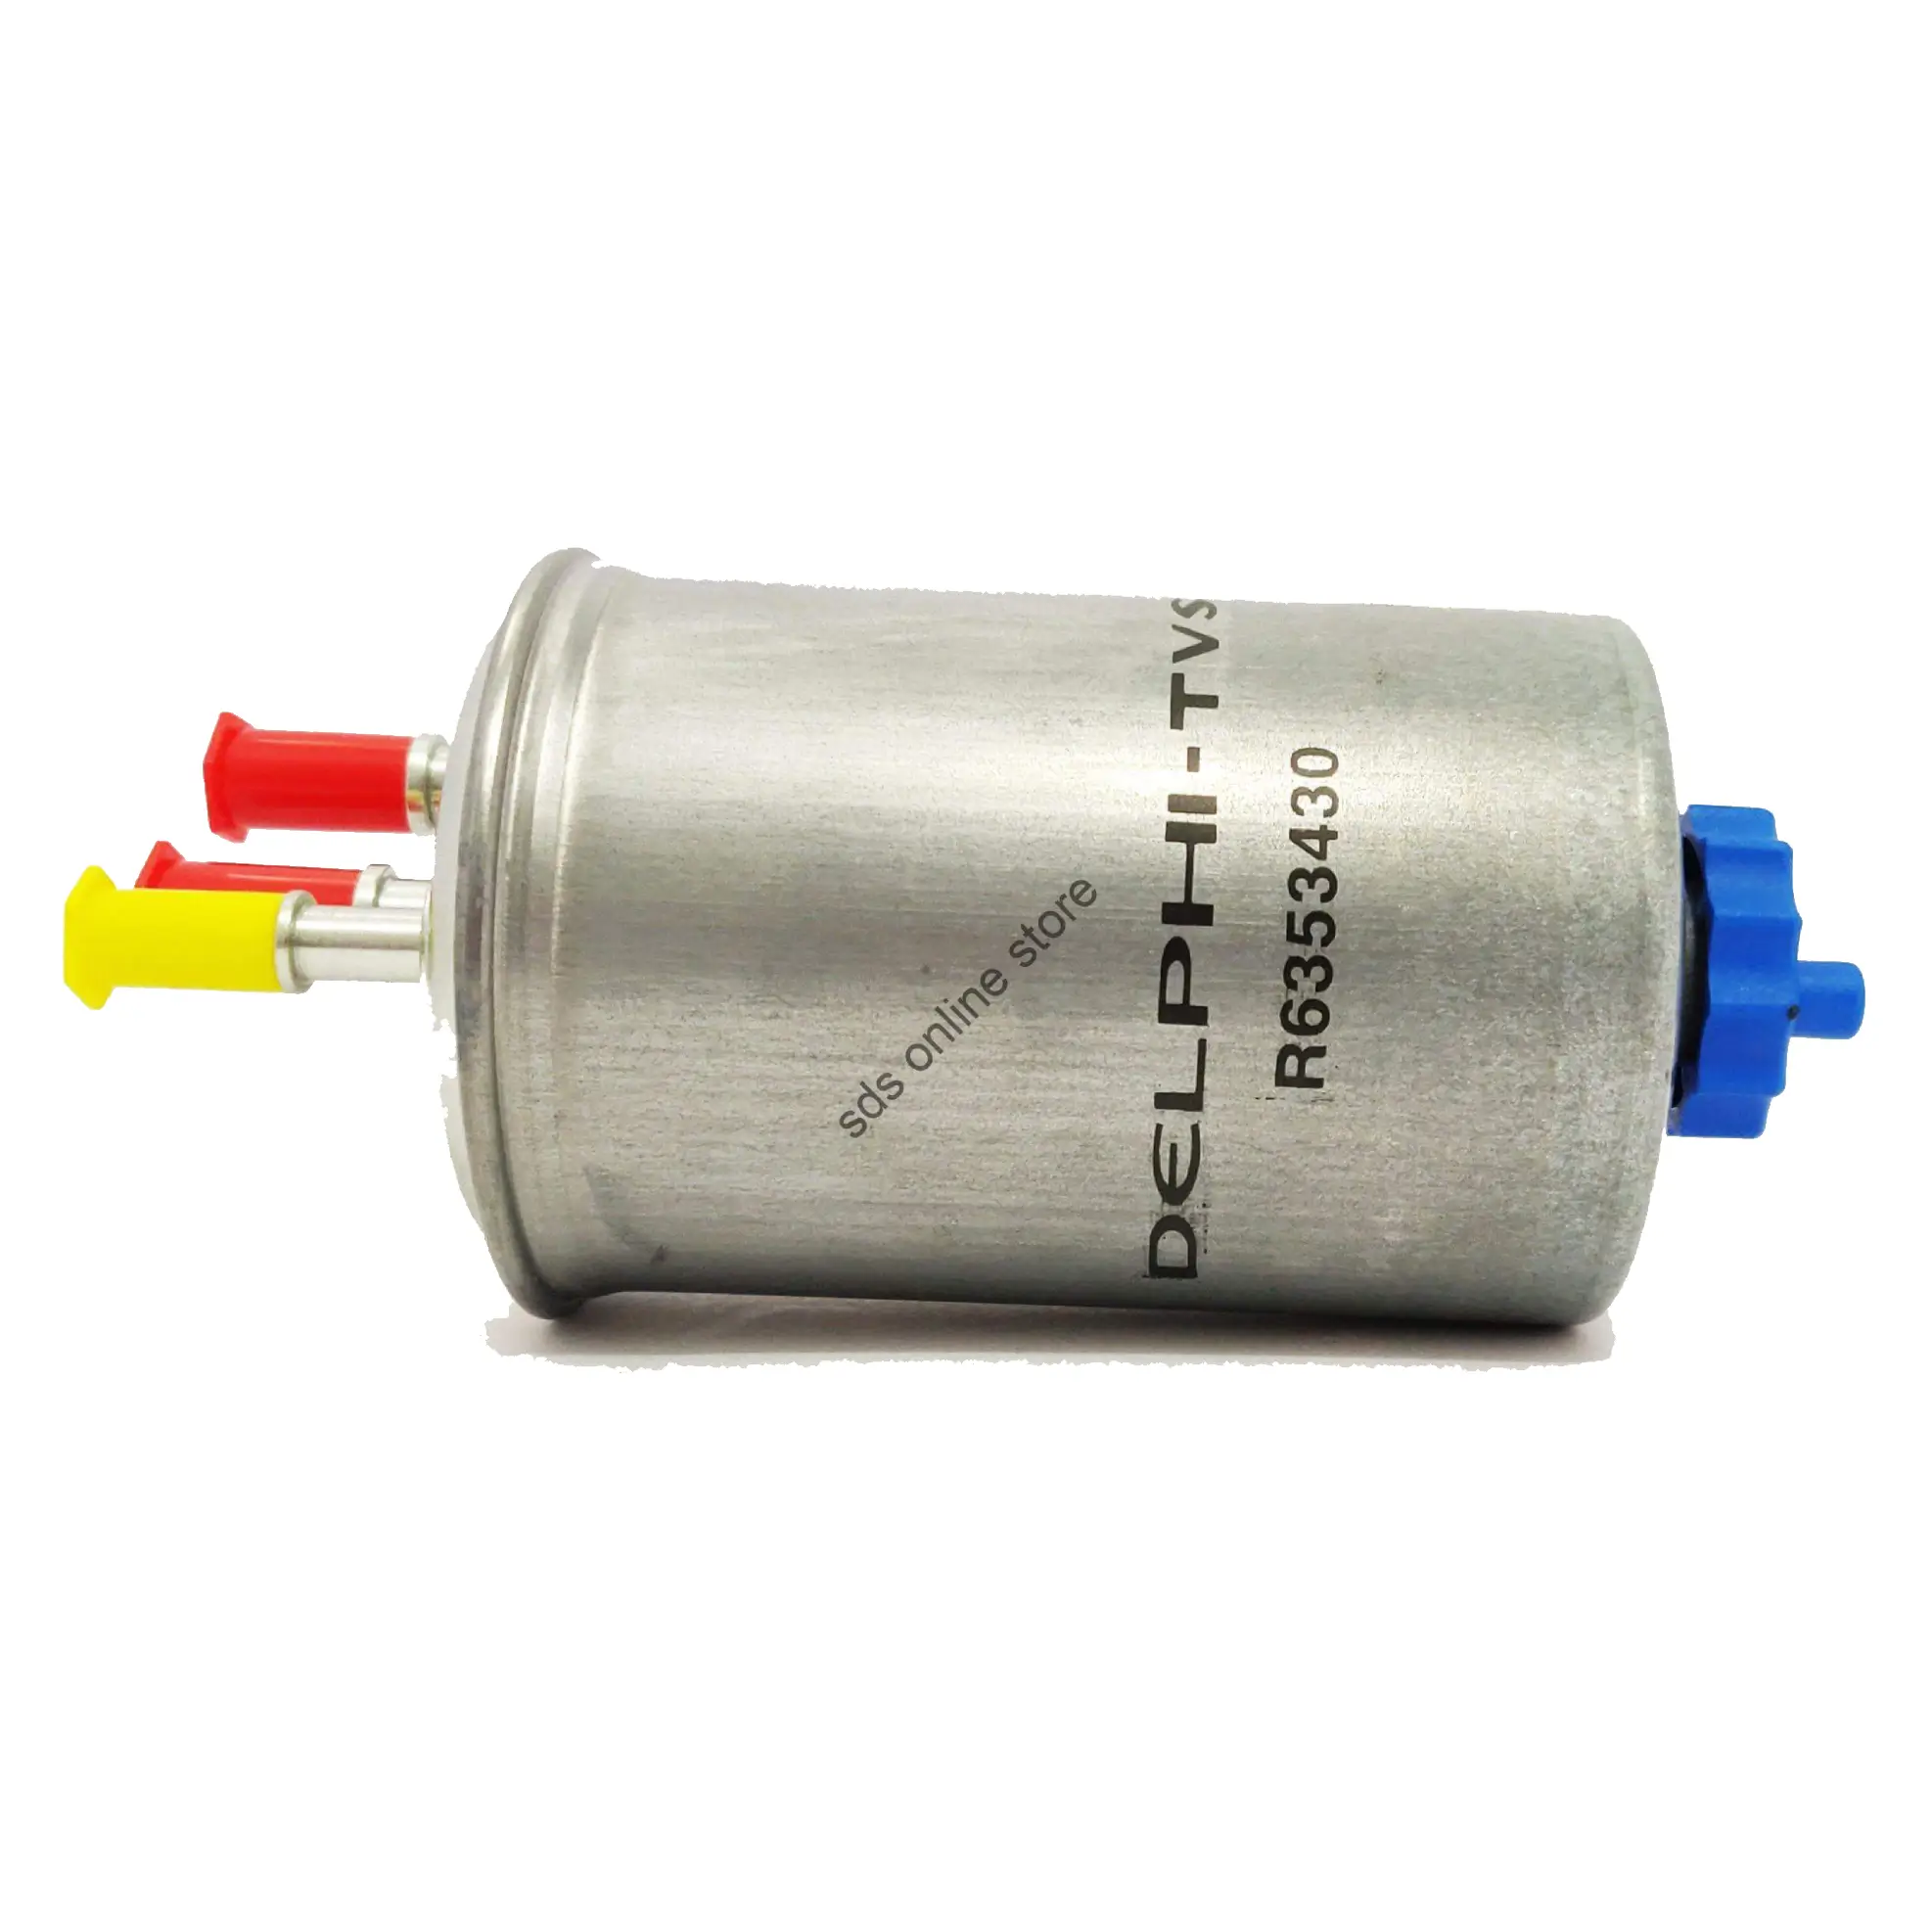 Diesel fuel filter Delphi Double M14x1.5, with water separator - AB Marine  service